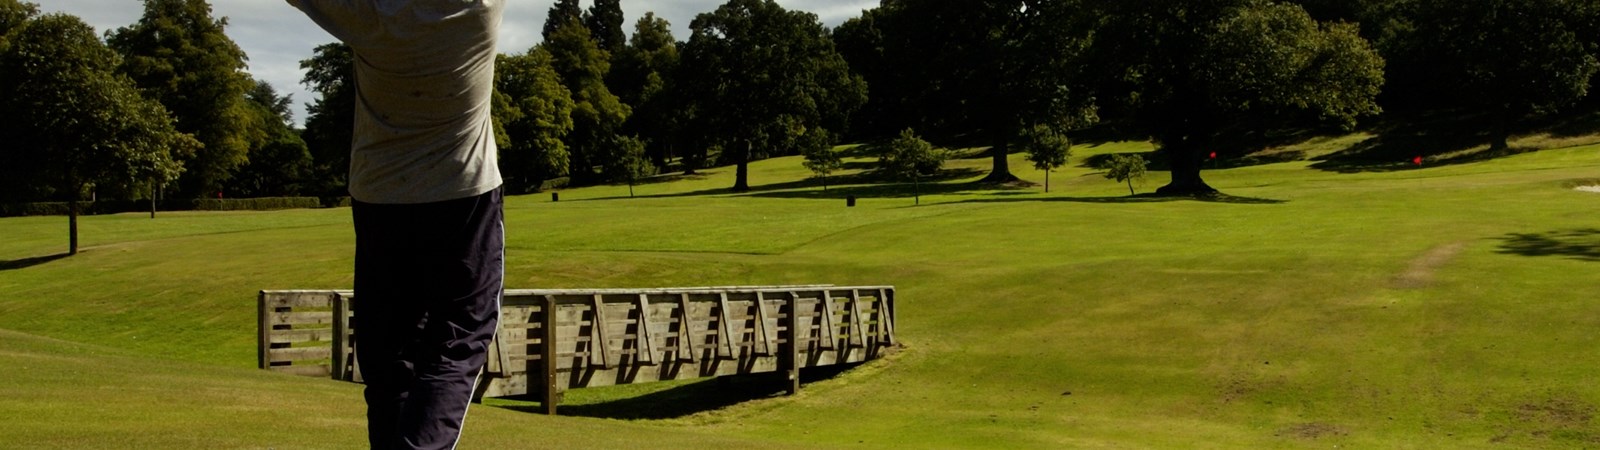 Golf in Falkirk|Golf Courses in Falkirk|Things to do in Falkirk